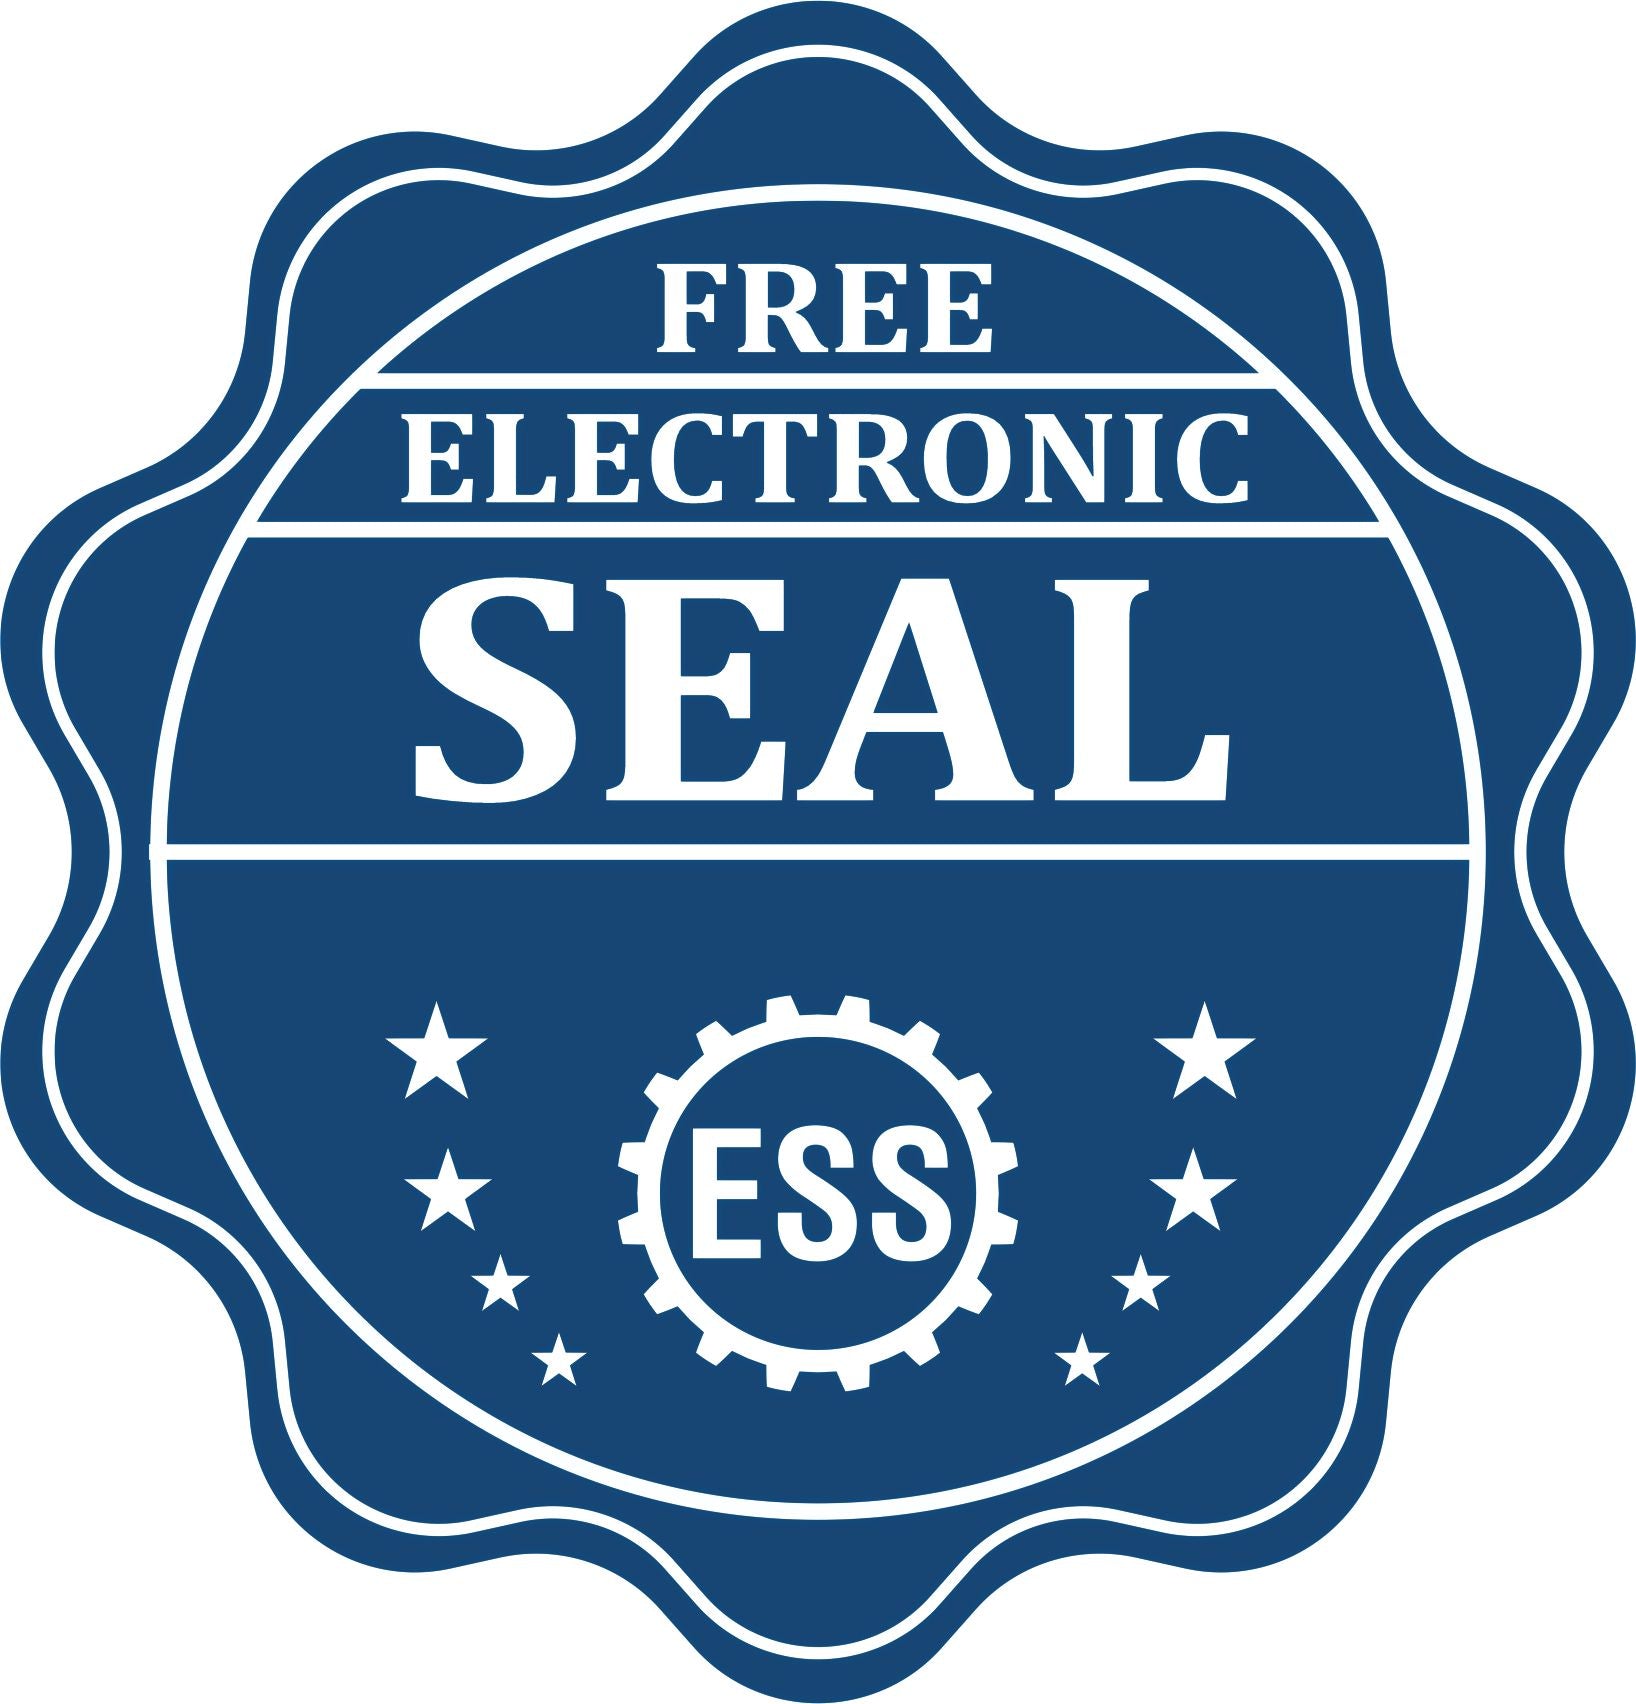 A badge showing a free electronic seal for the Long Reach New Mexico Land Surveyor Seal with stars and the ESS gear on the emblem.